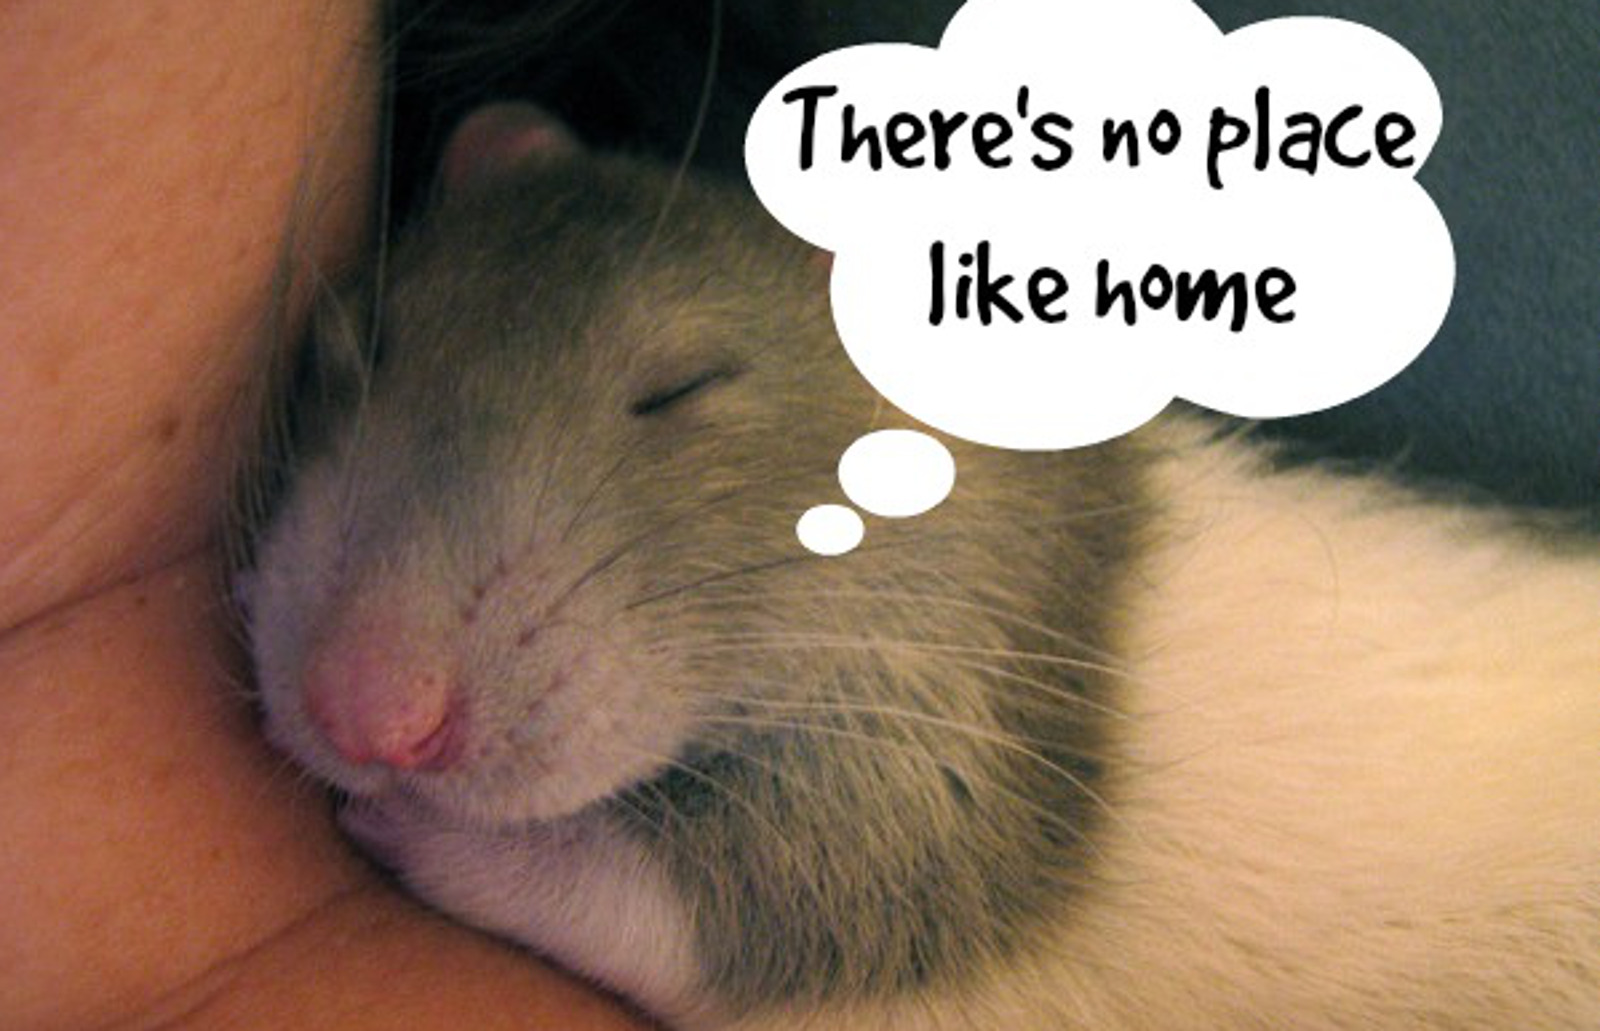 Proof Rats Should be Loved, Not Used for Tests in Labs! (Photos)